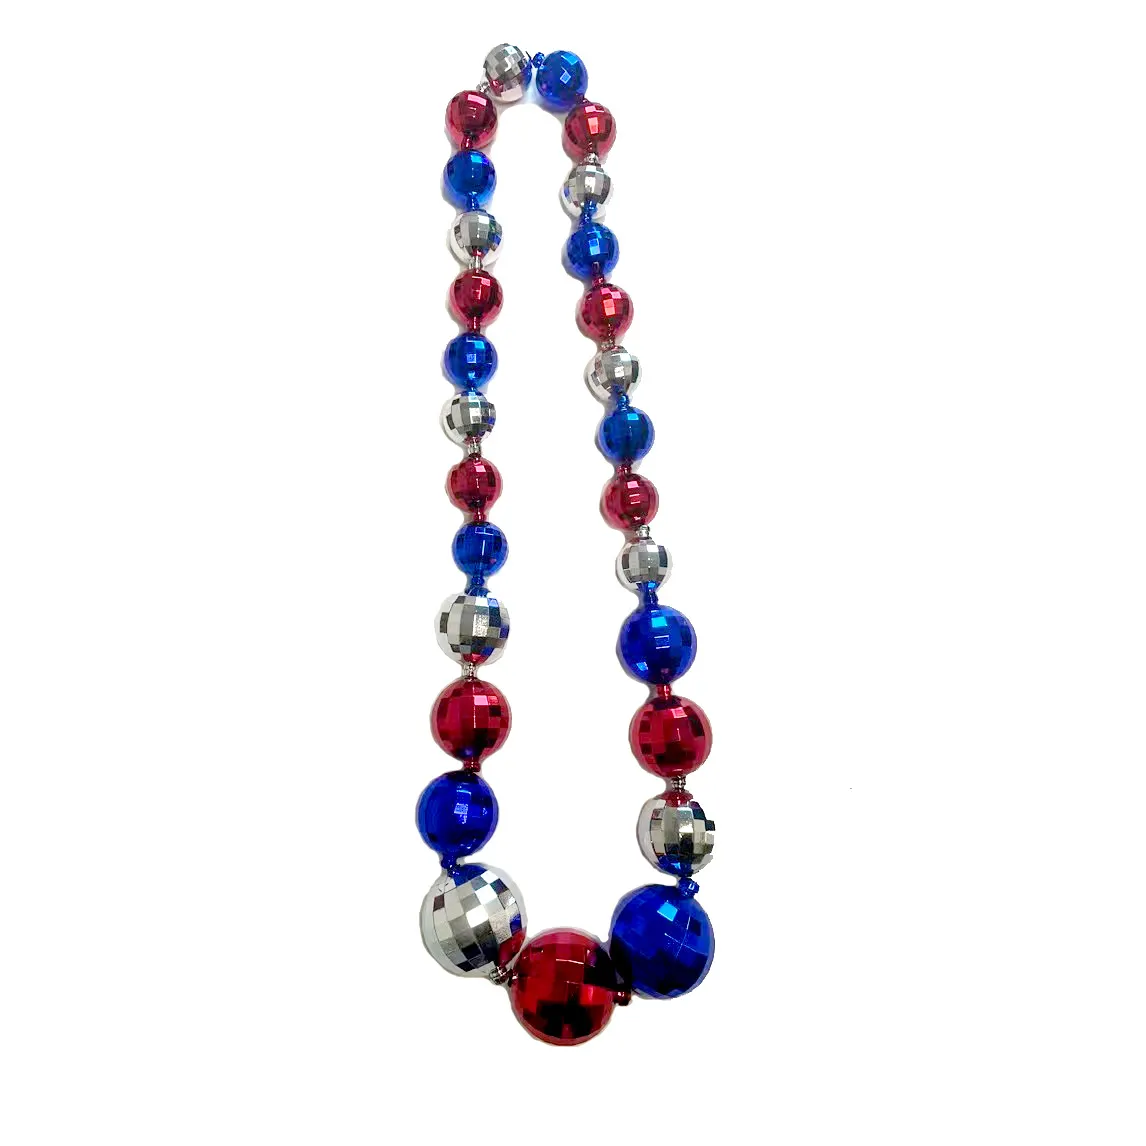 4th Of July Round Multi Color Patriotic Jumbo Bead Necklace For Independence Day Events And Party Accessories